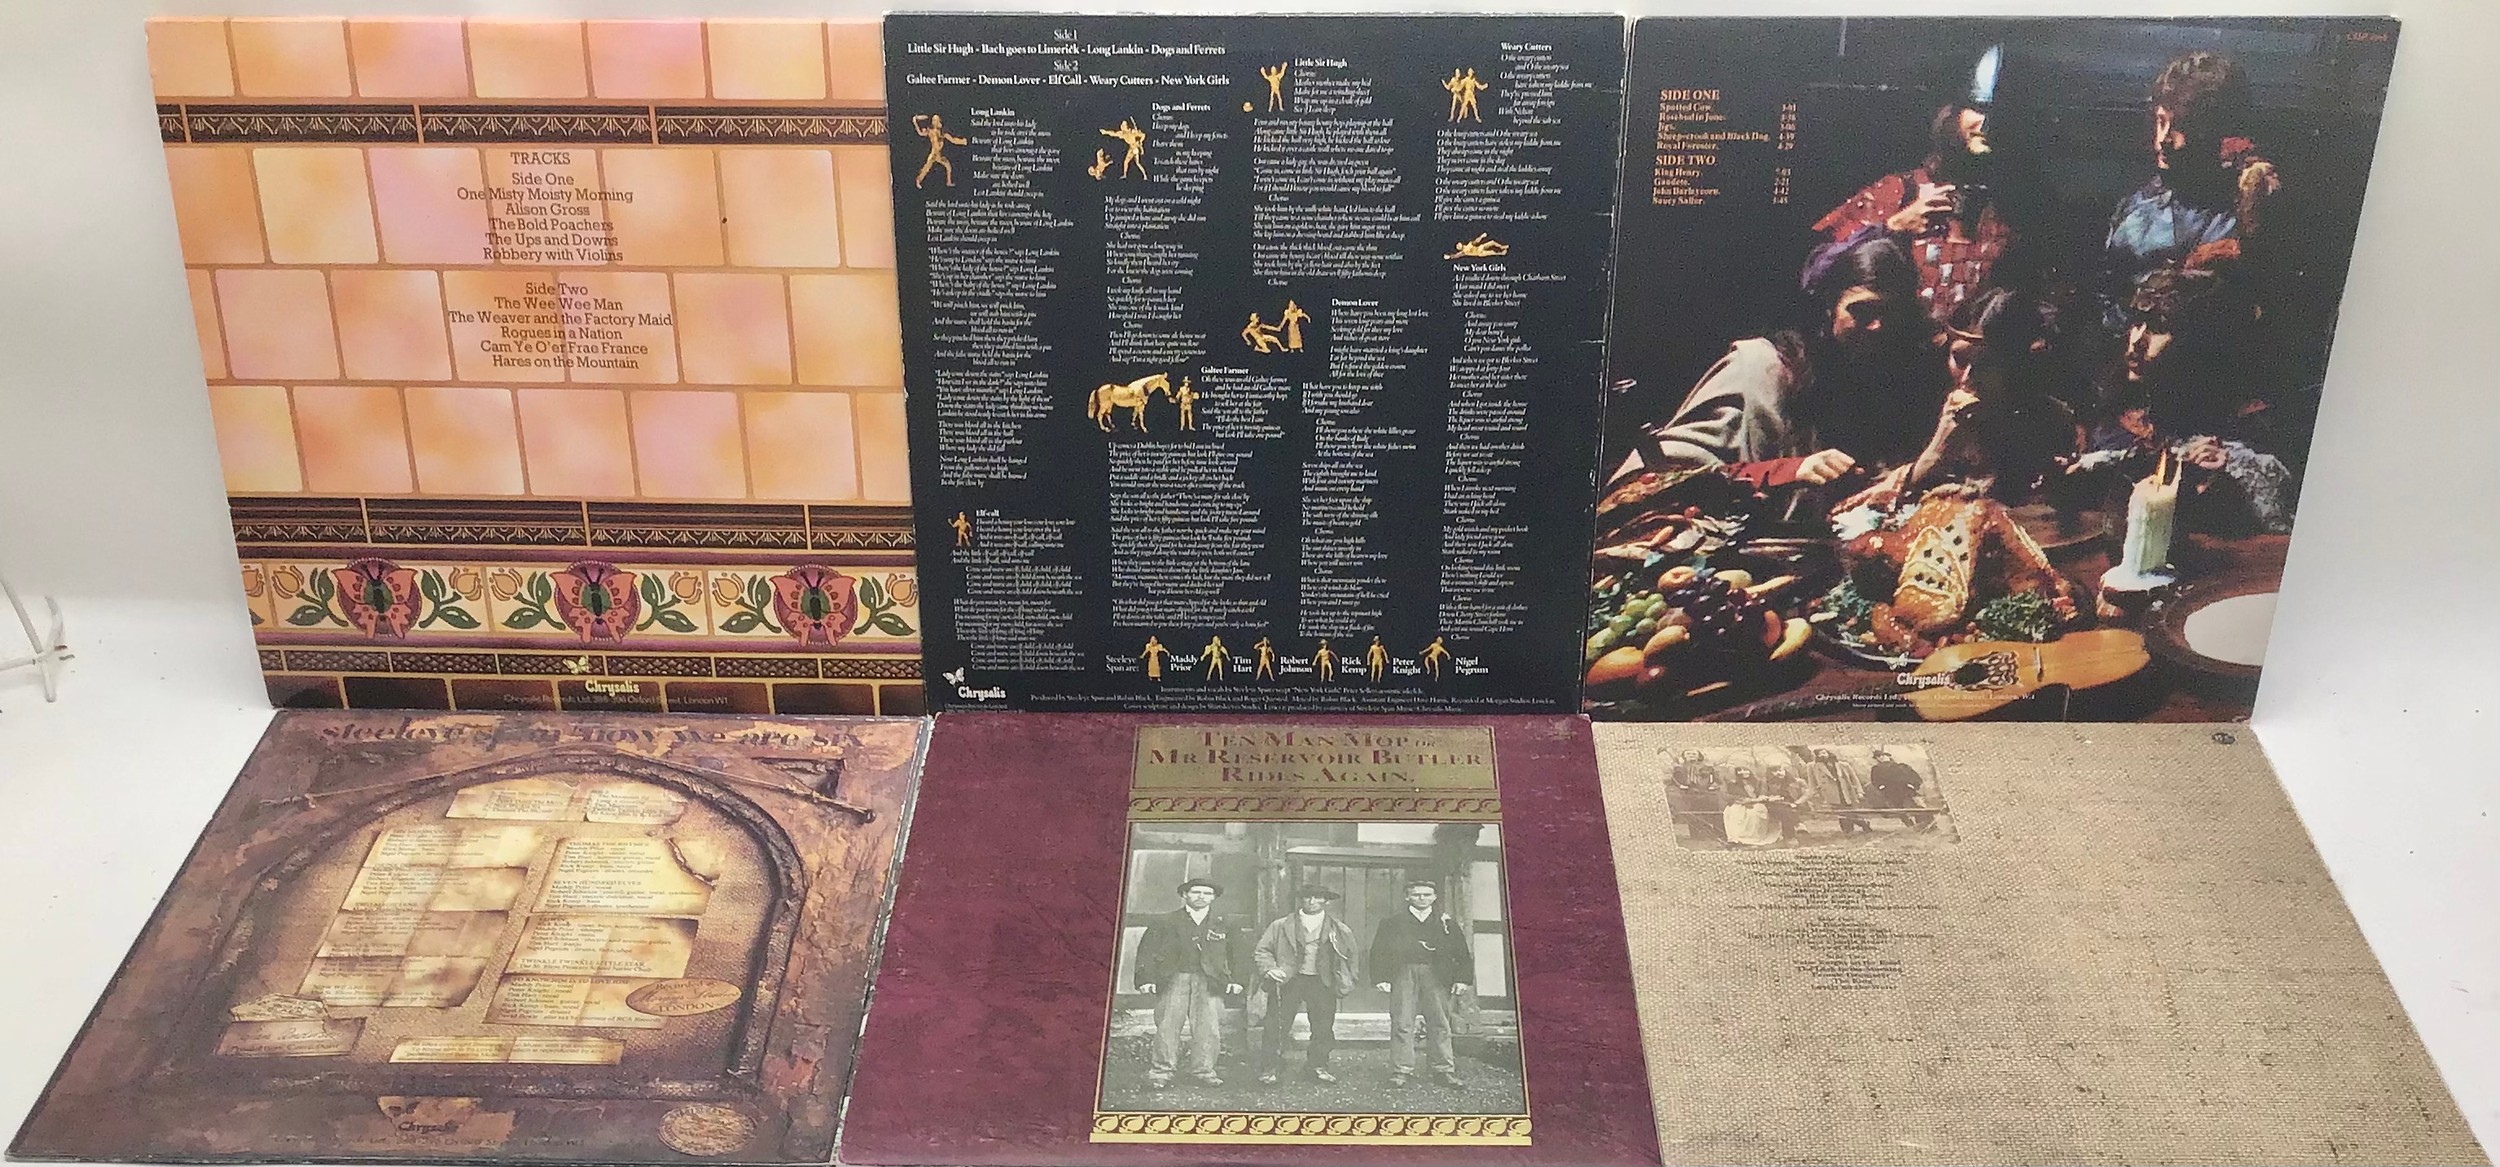 6 x STEELEYE SPAN VINYL ALBUMS. These albums are all in Ex conditions and consist of titles - Please - Image 2 of 2